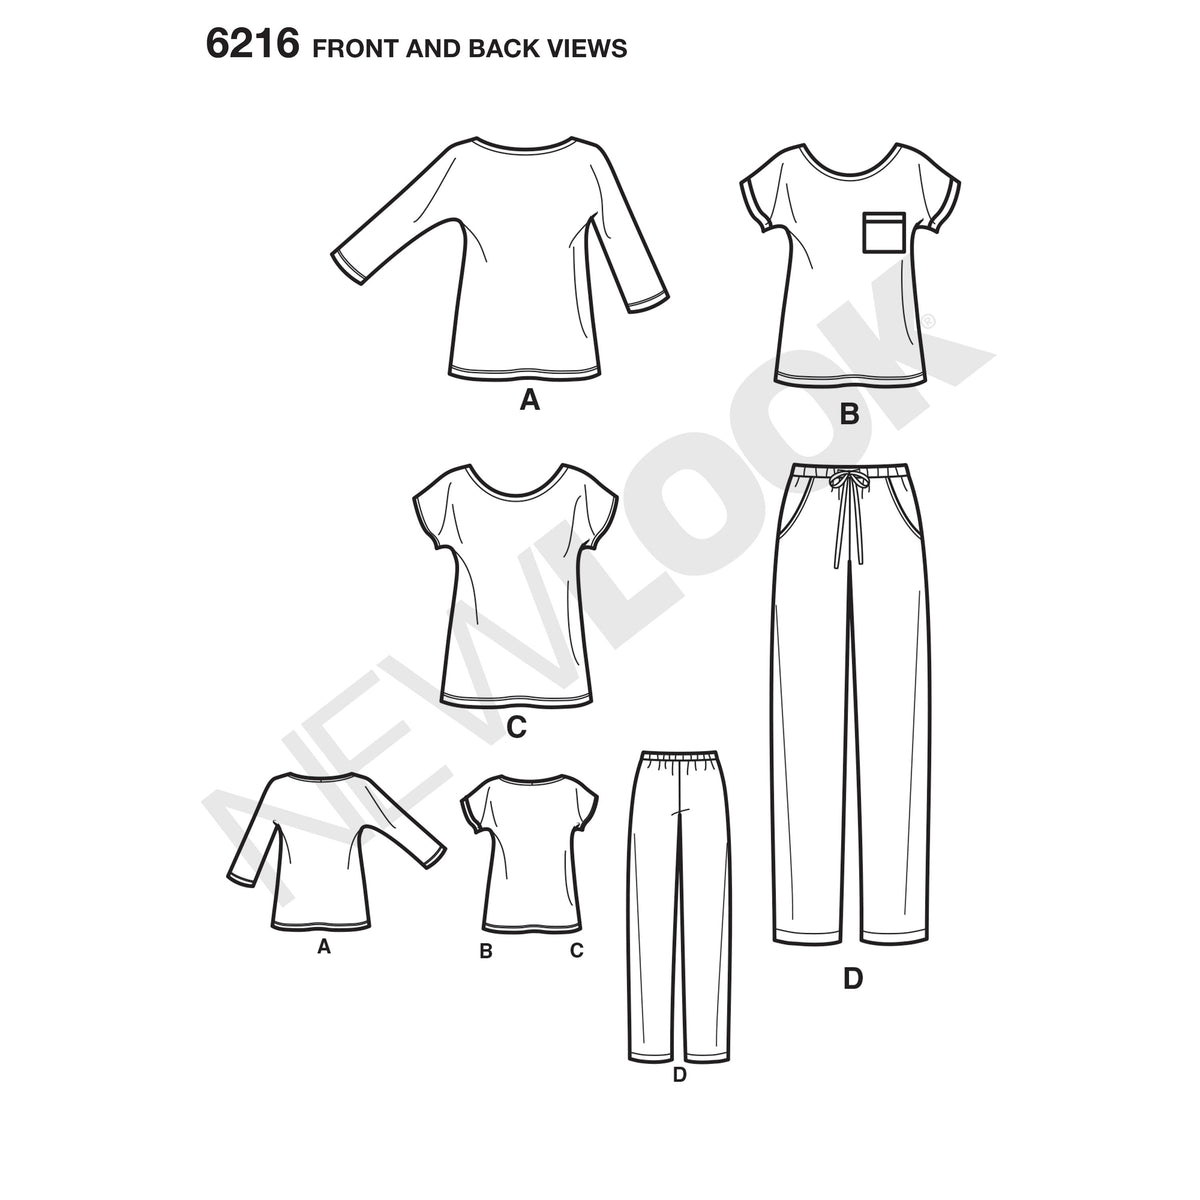 6216 Misses' Knit Tops and Pants